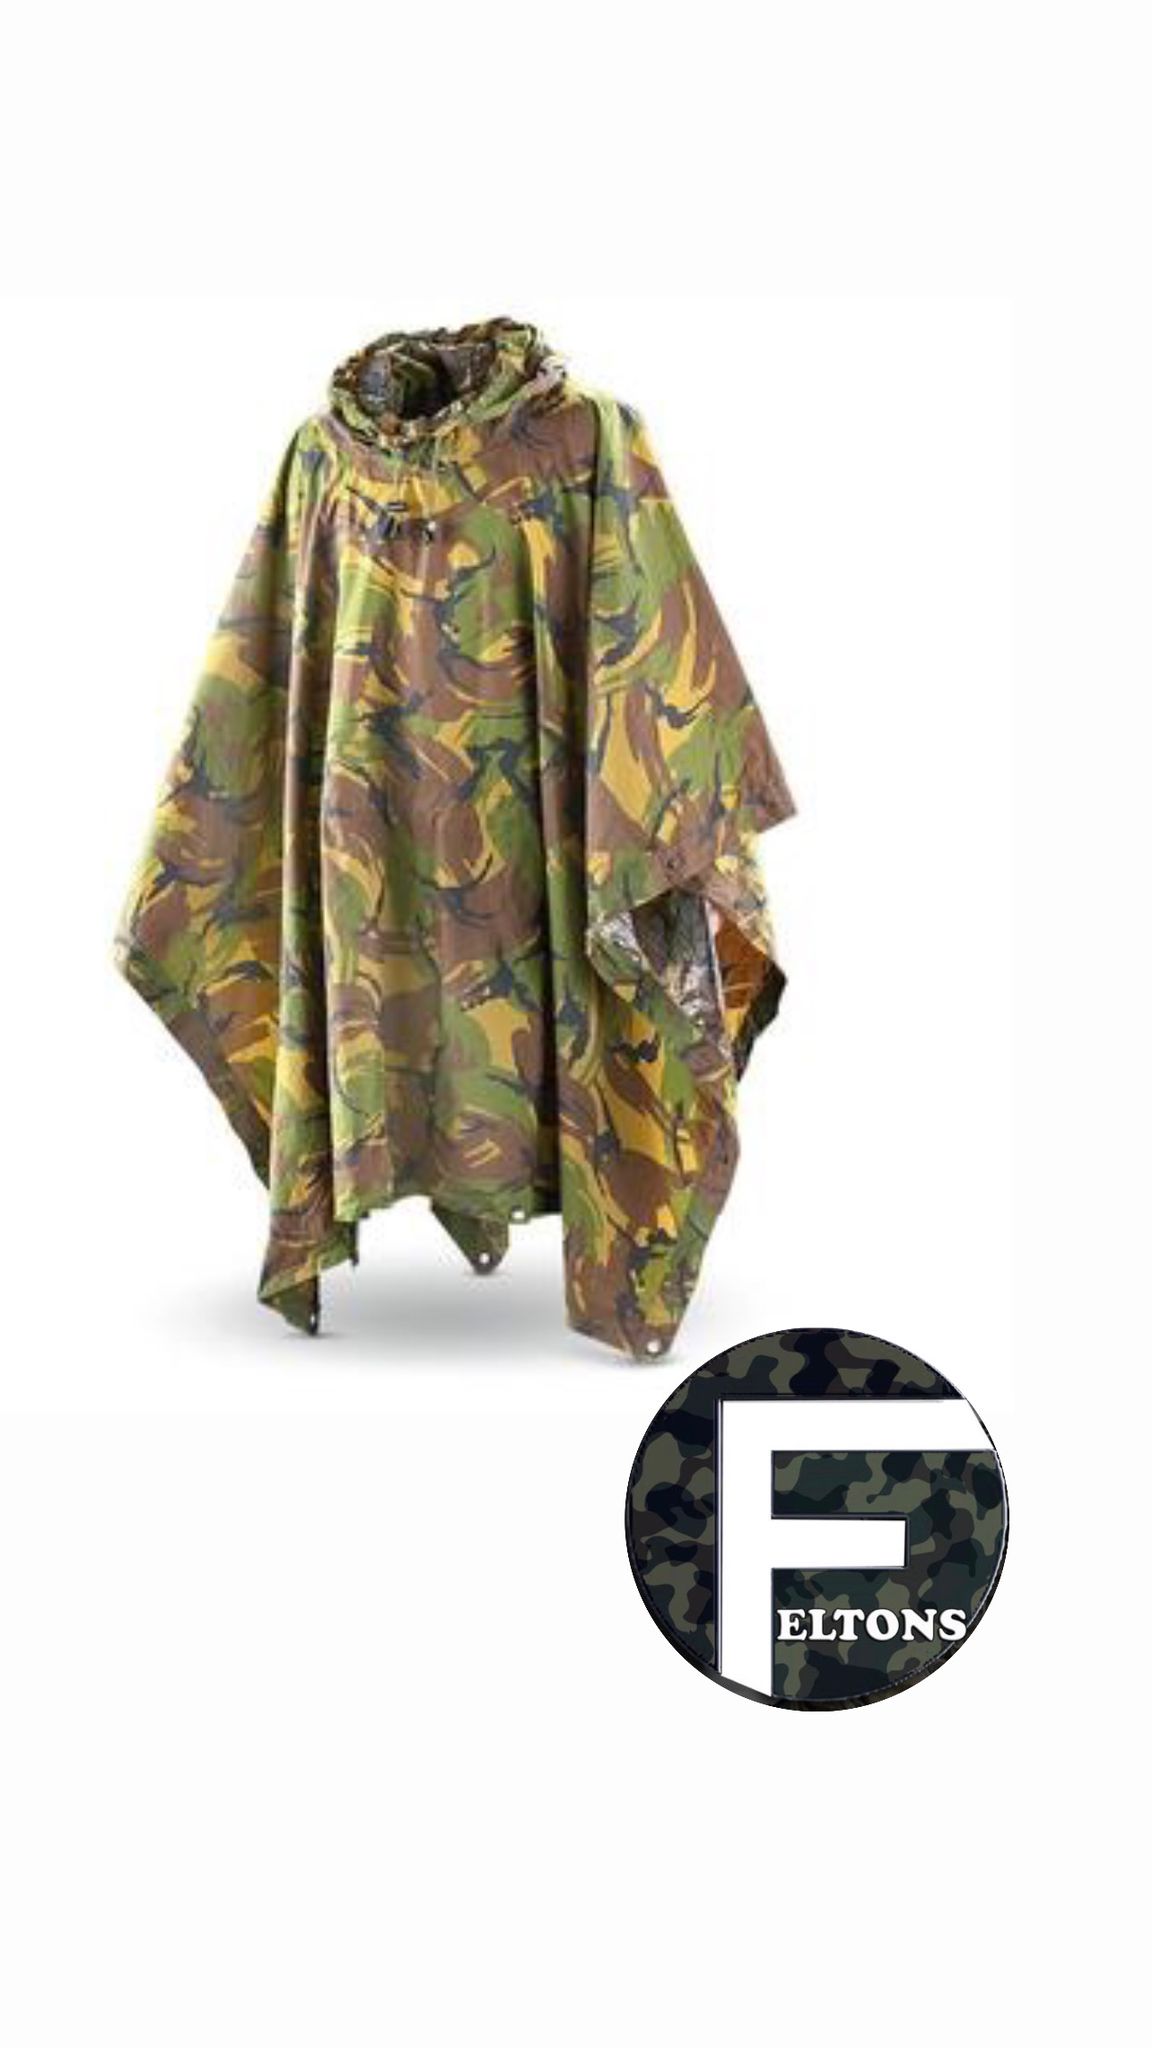 "Genuine Dutch Military Issue Ponchos - DPM Woodland Camo Super Grade- as new condition- used a few times if that